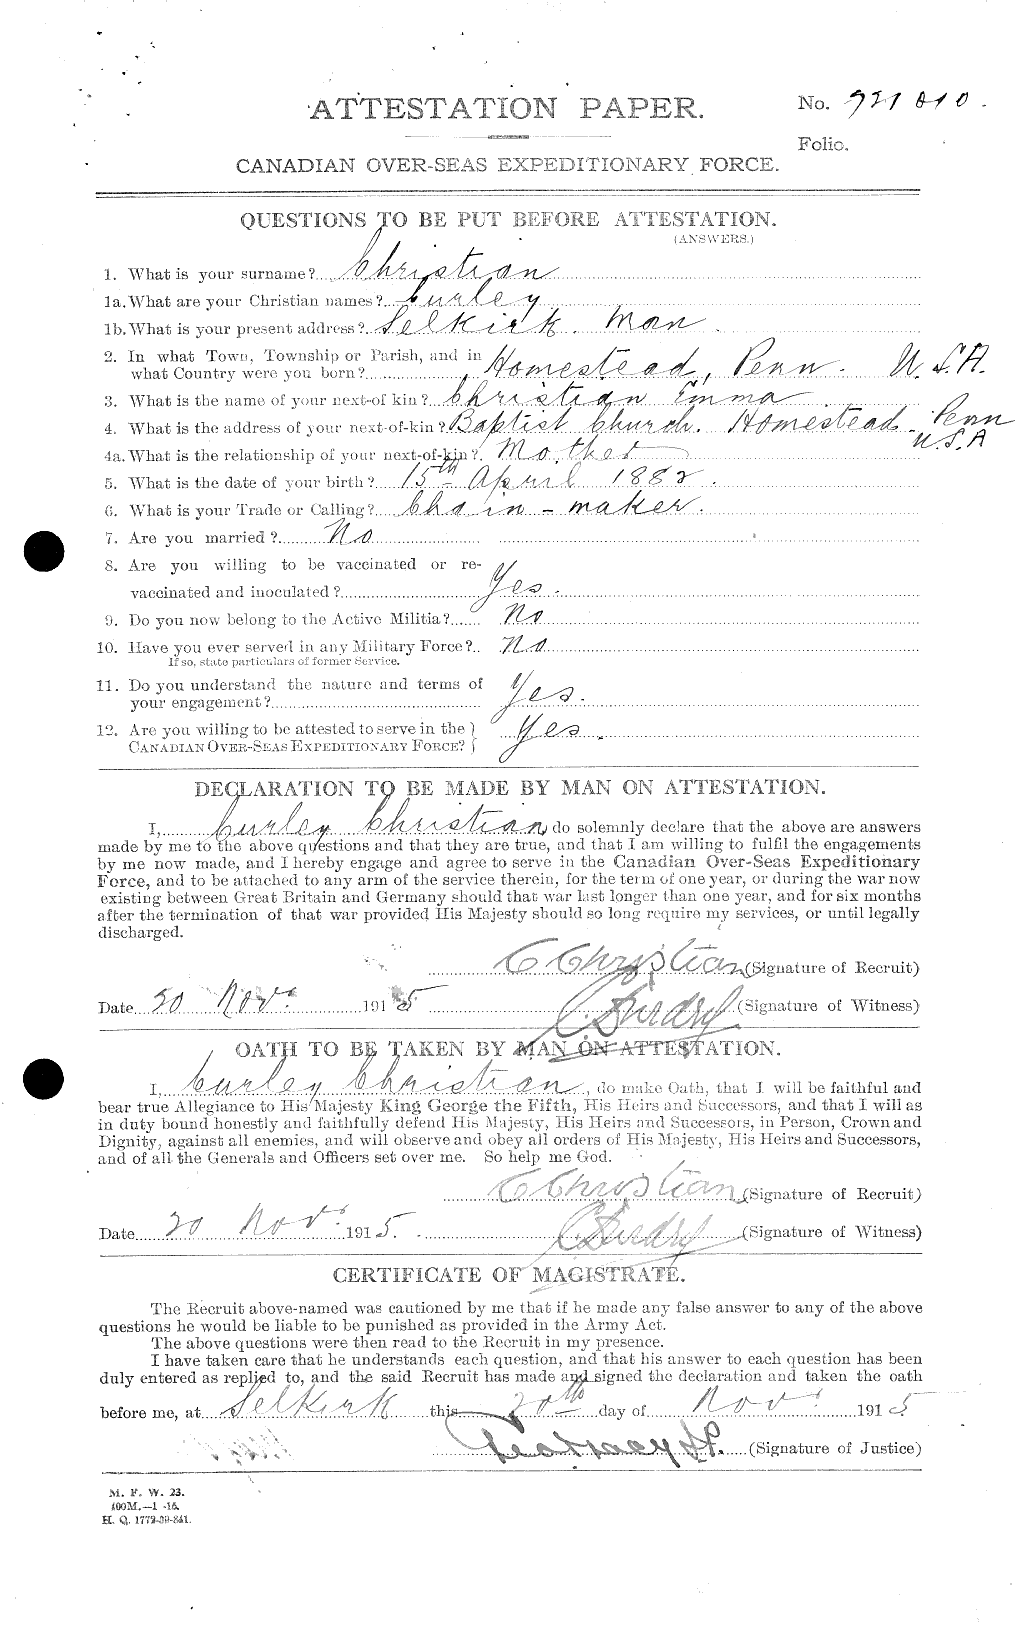 Personnel Records of the First World War - CEF 021657a